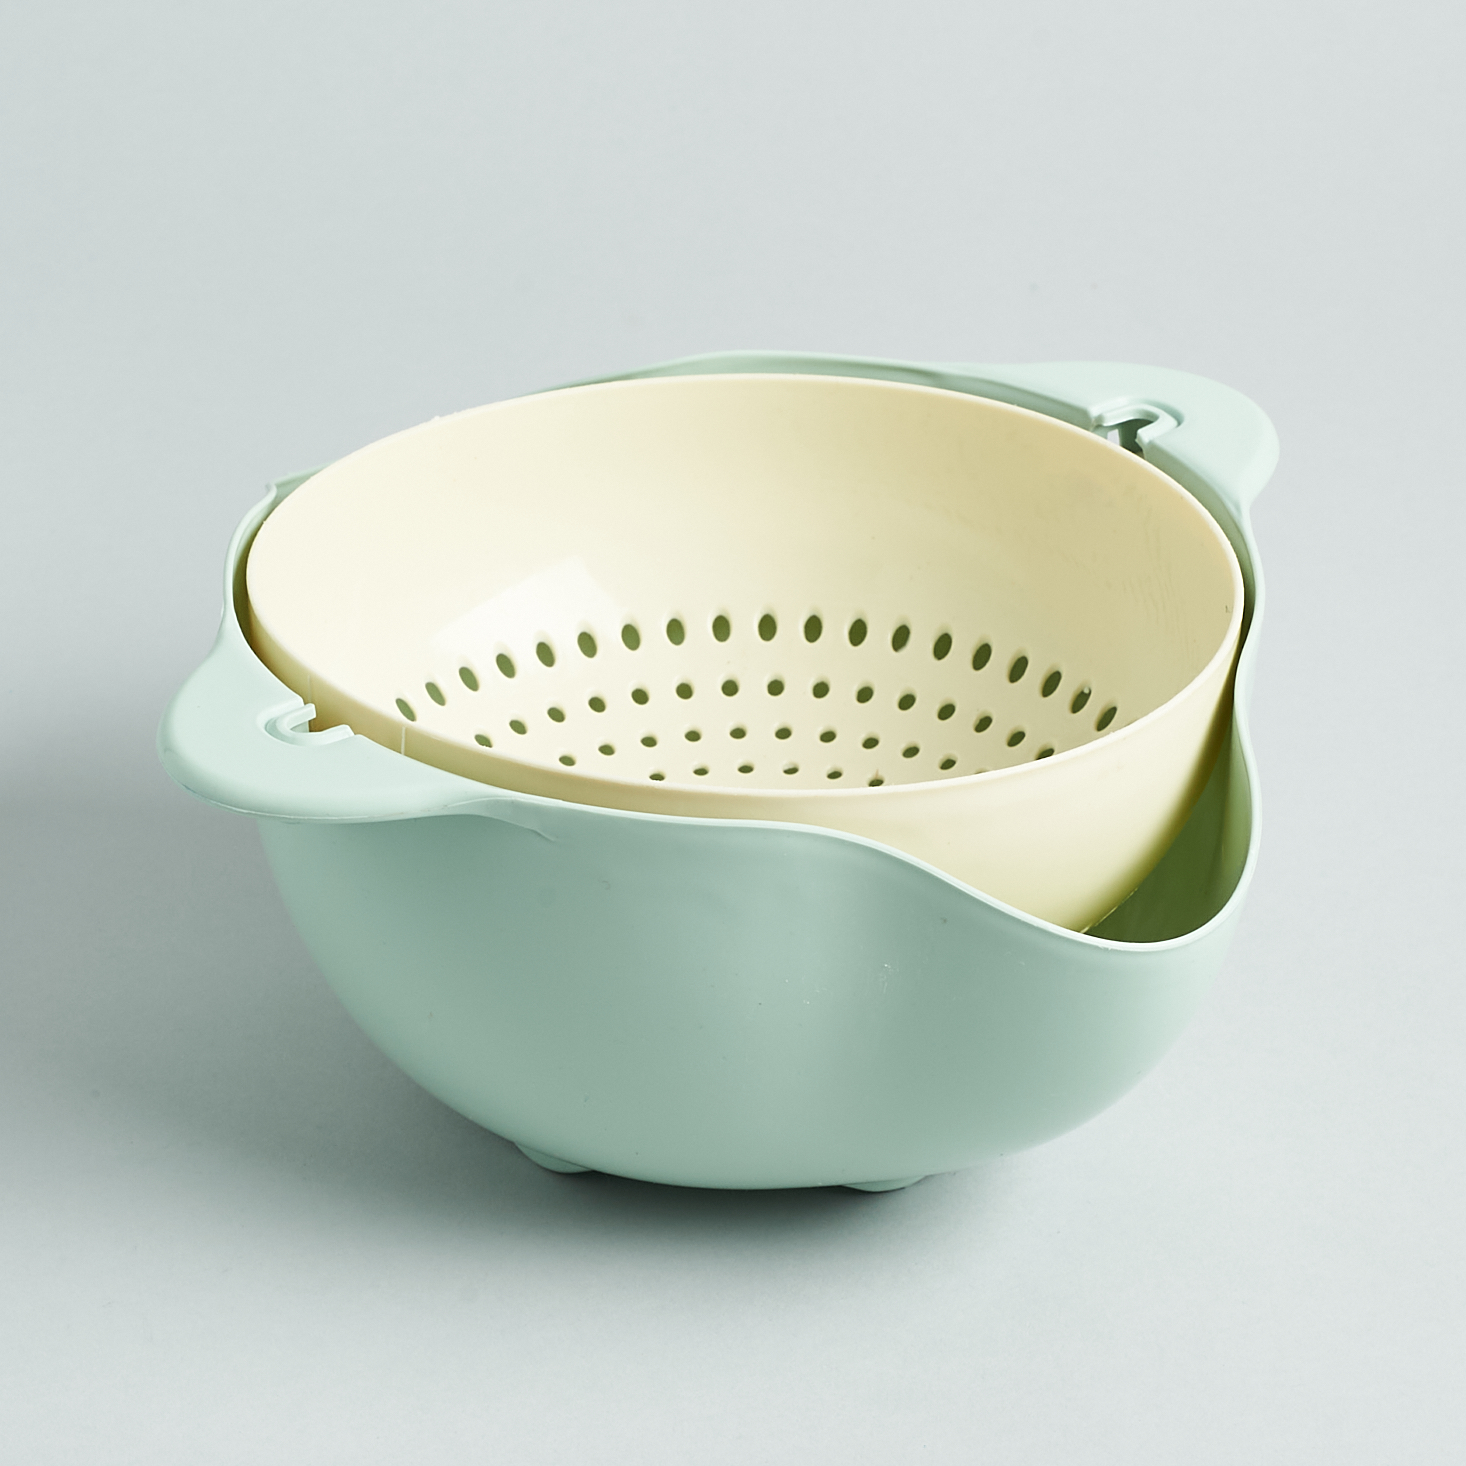 eco-friendly colander from JourneeBox Spring 2021